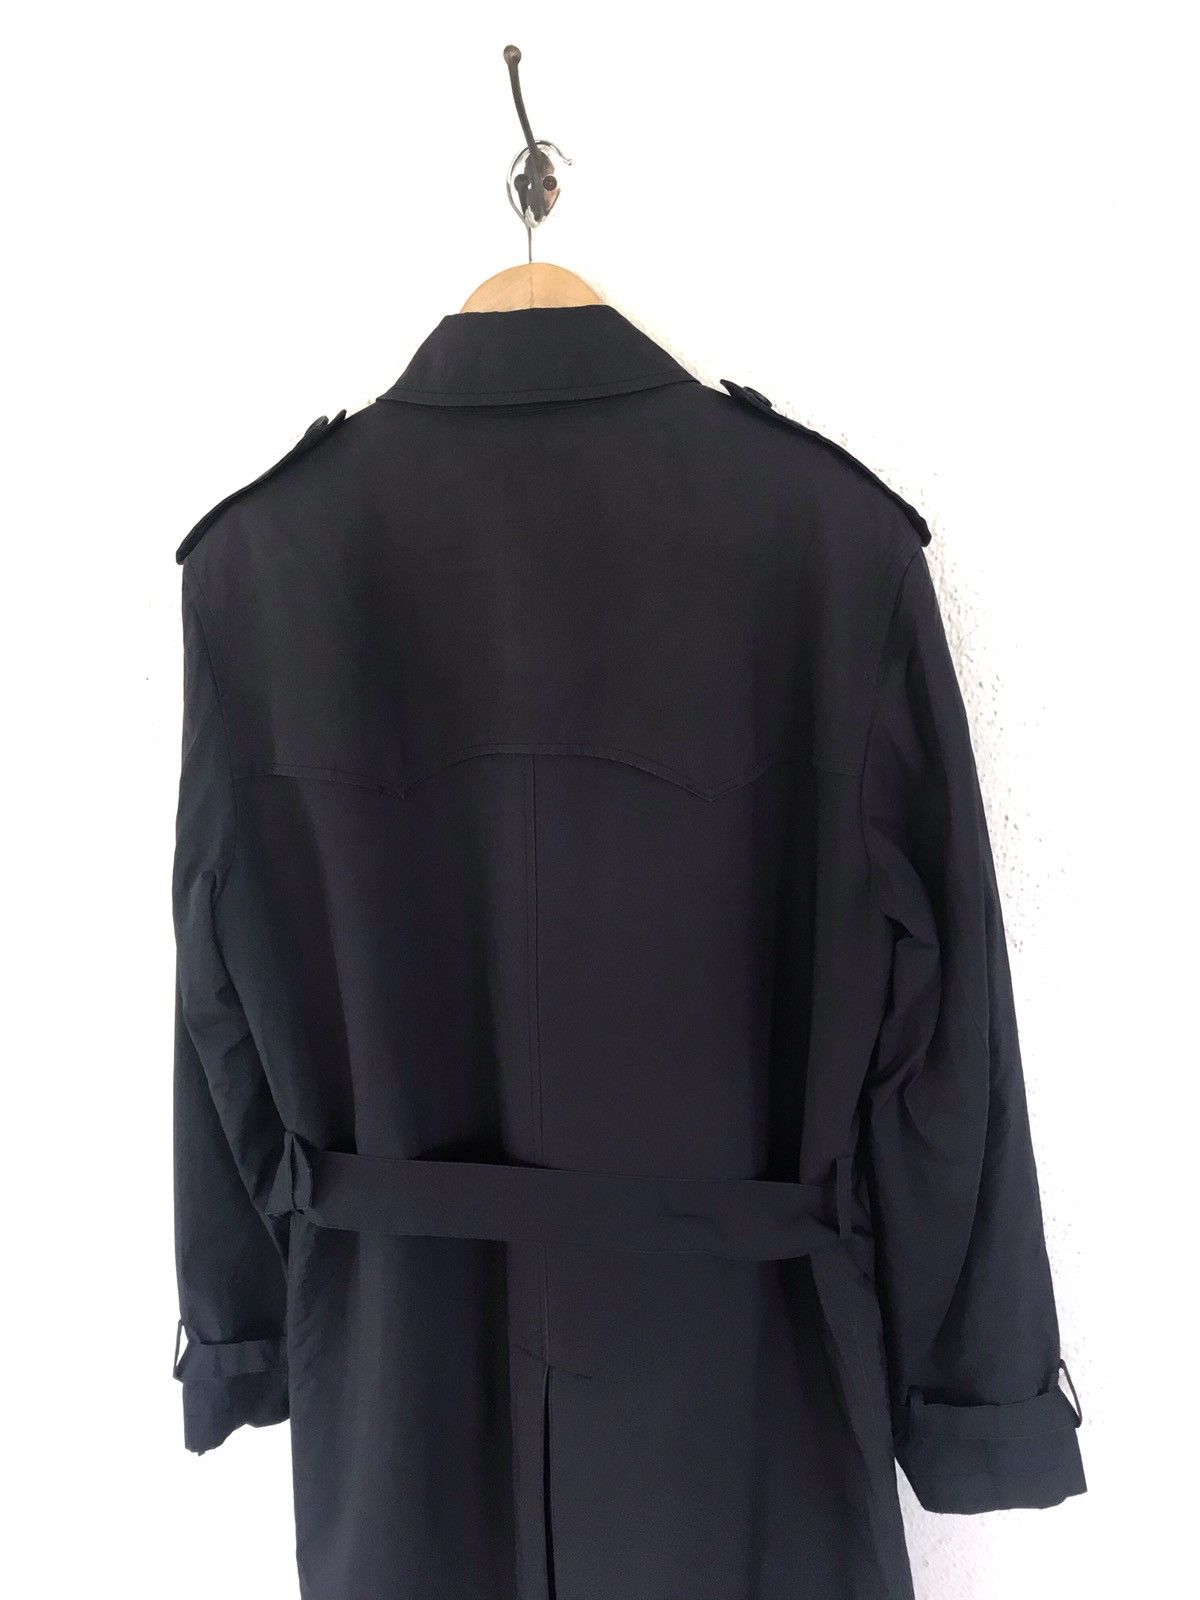 Paul Smith Collection Trench Coat - 8